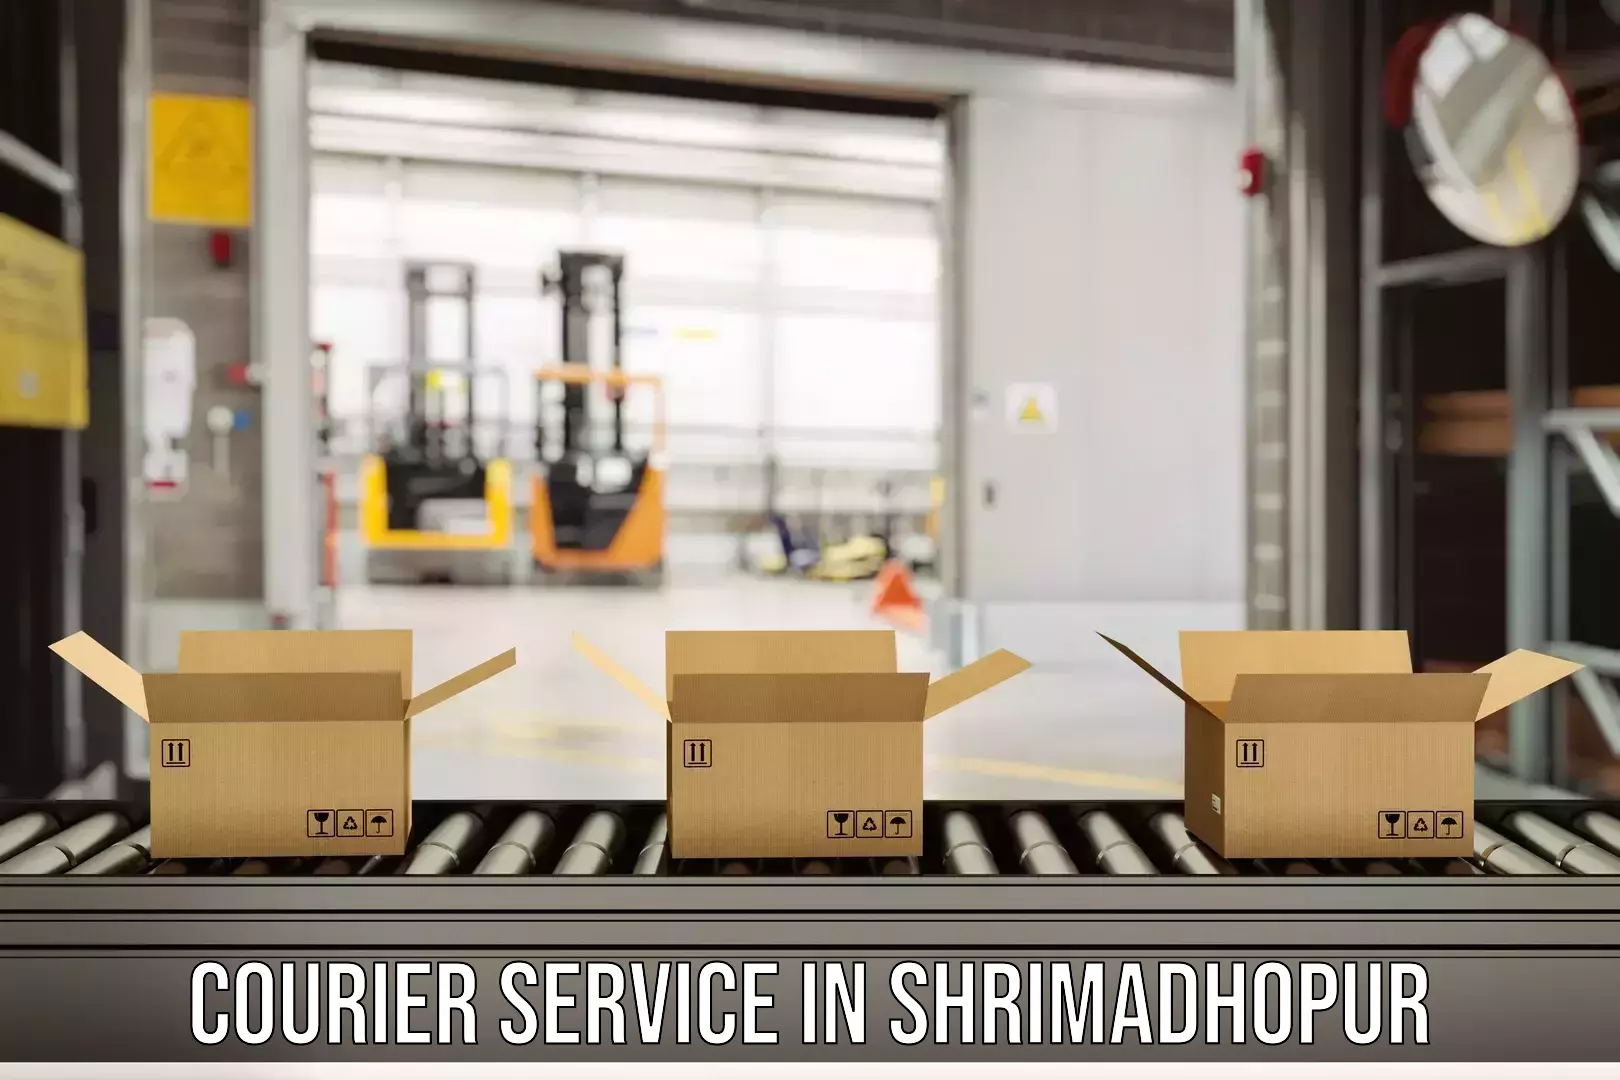 Postal and courier services in Shrimadhopur